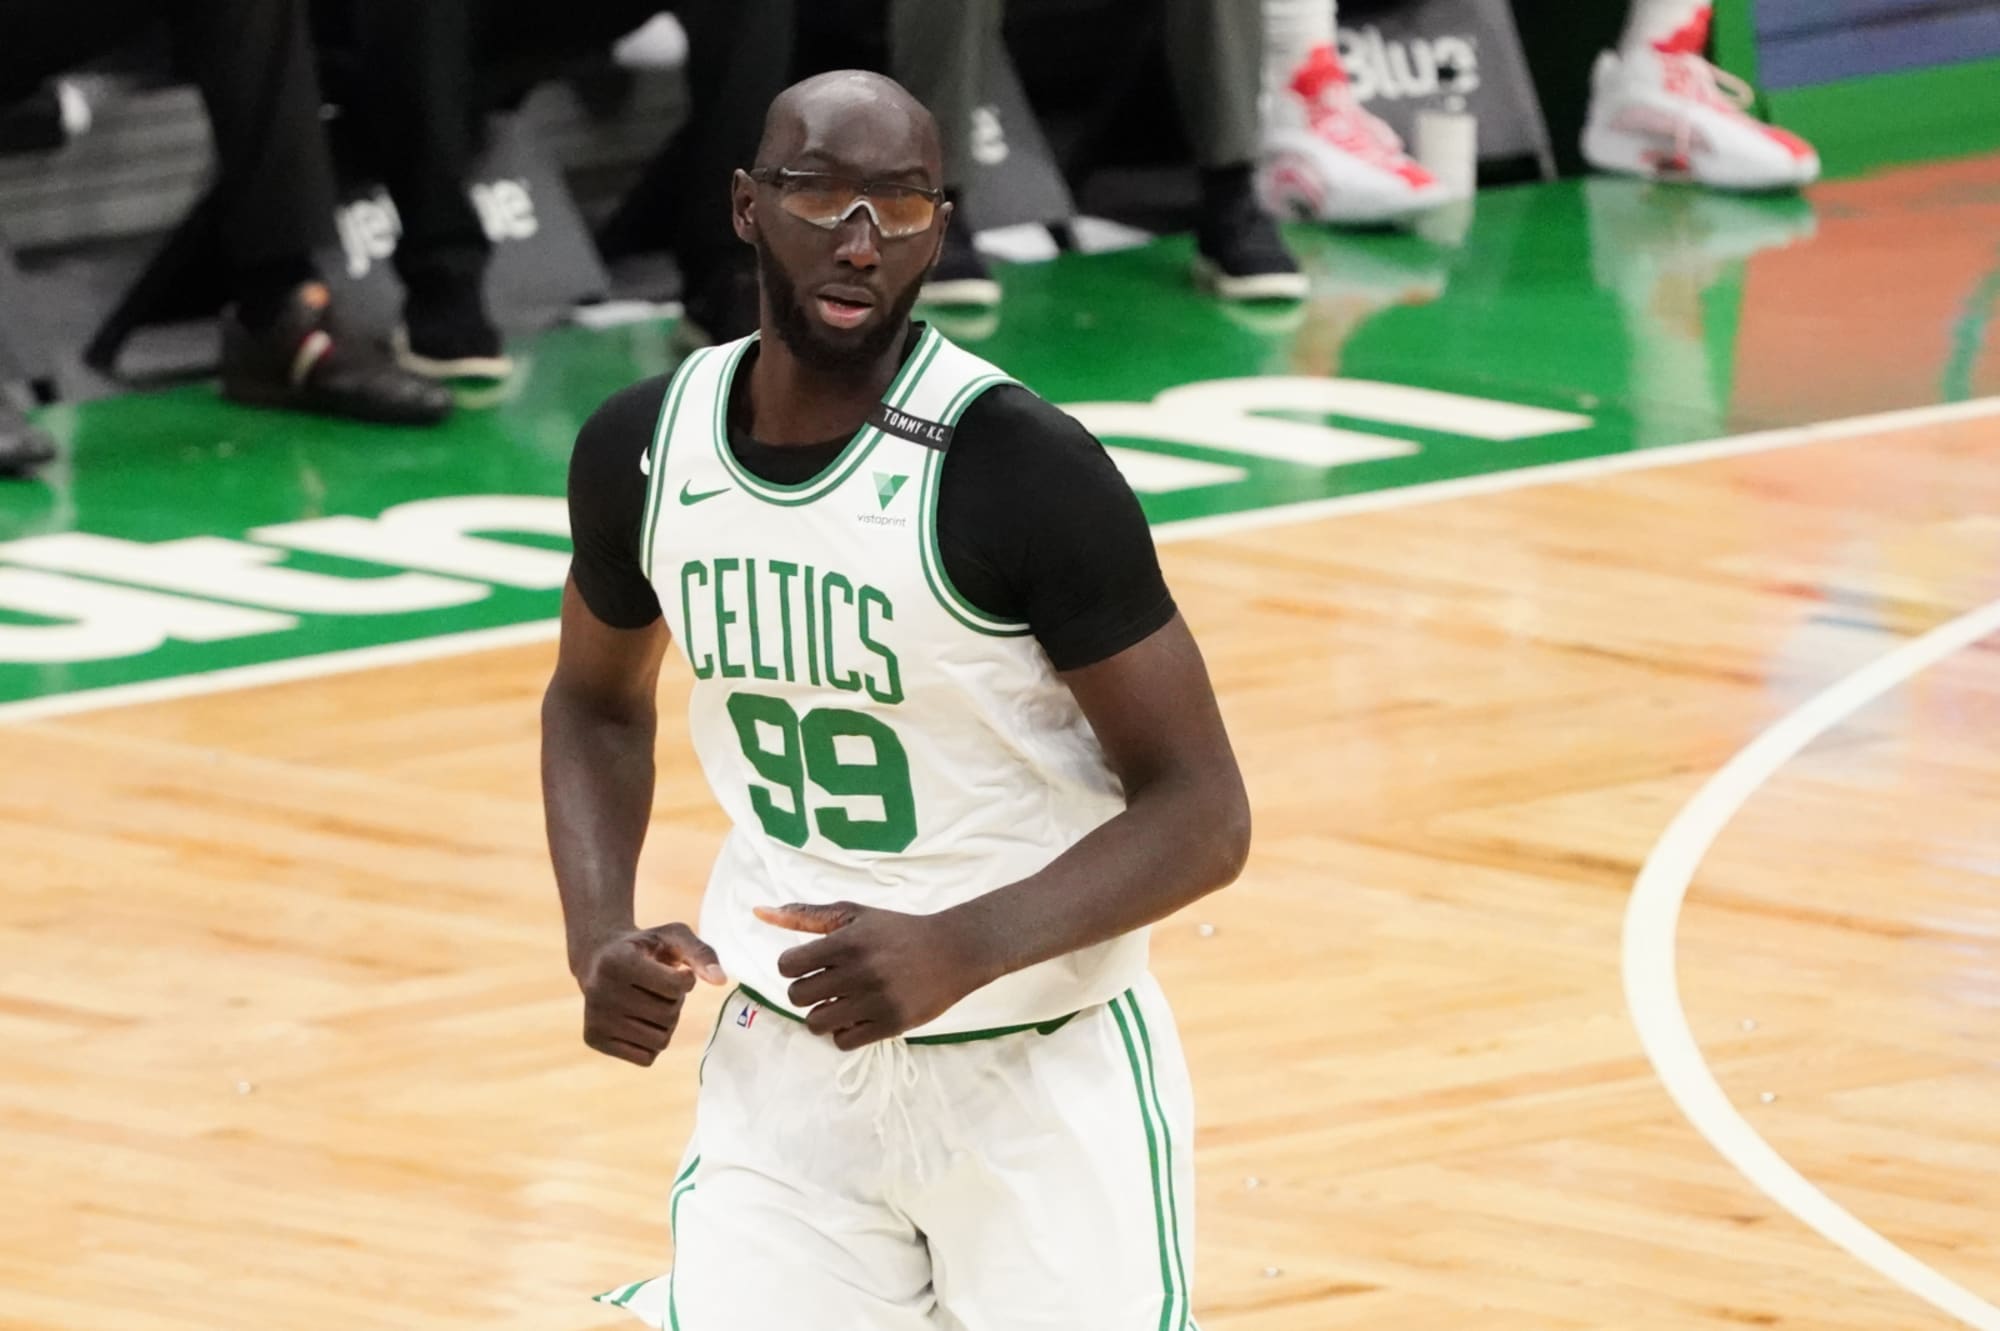 Boston Celtics Tacko Fall proving to be more than a storybook giant